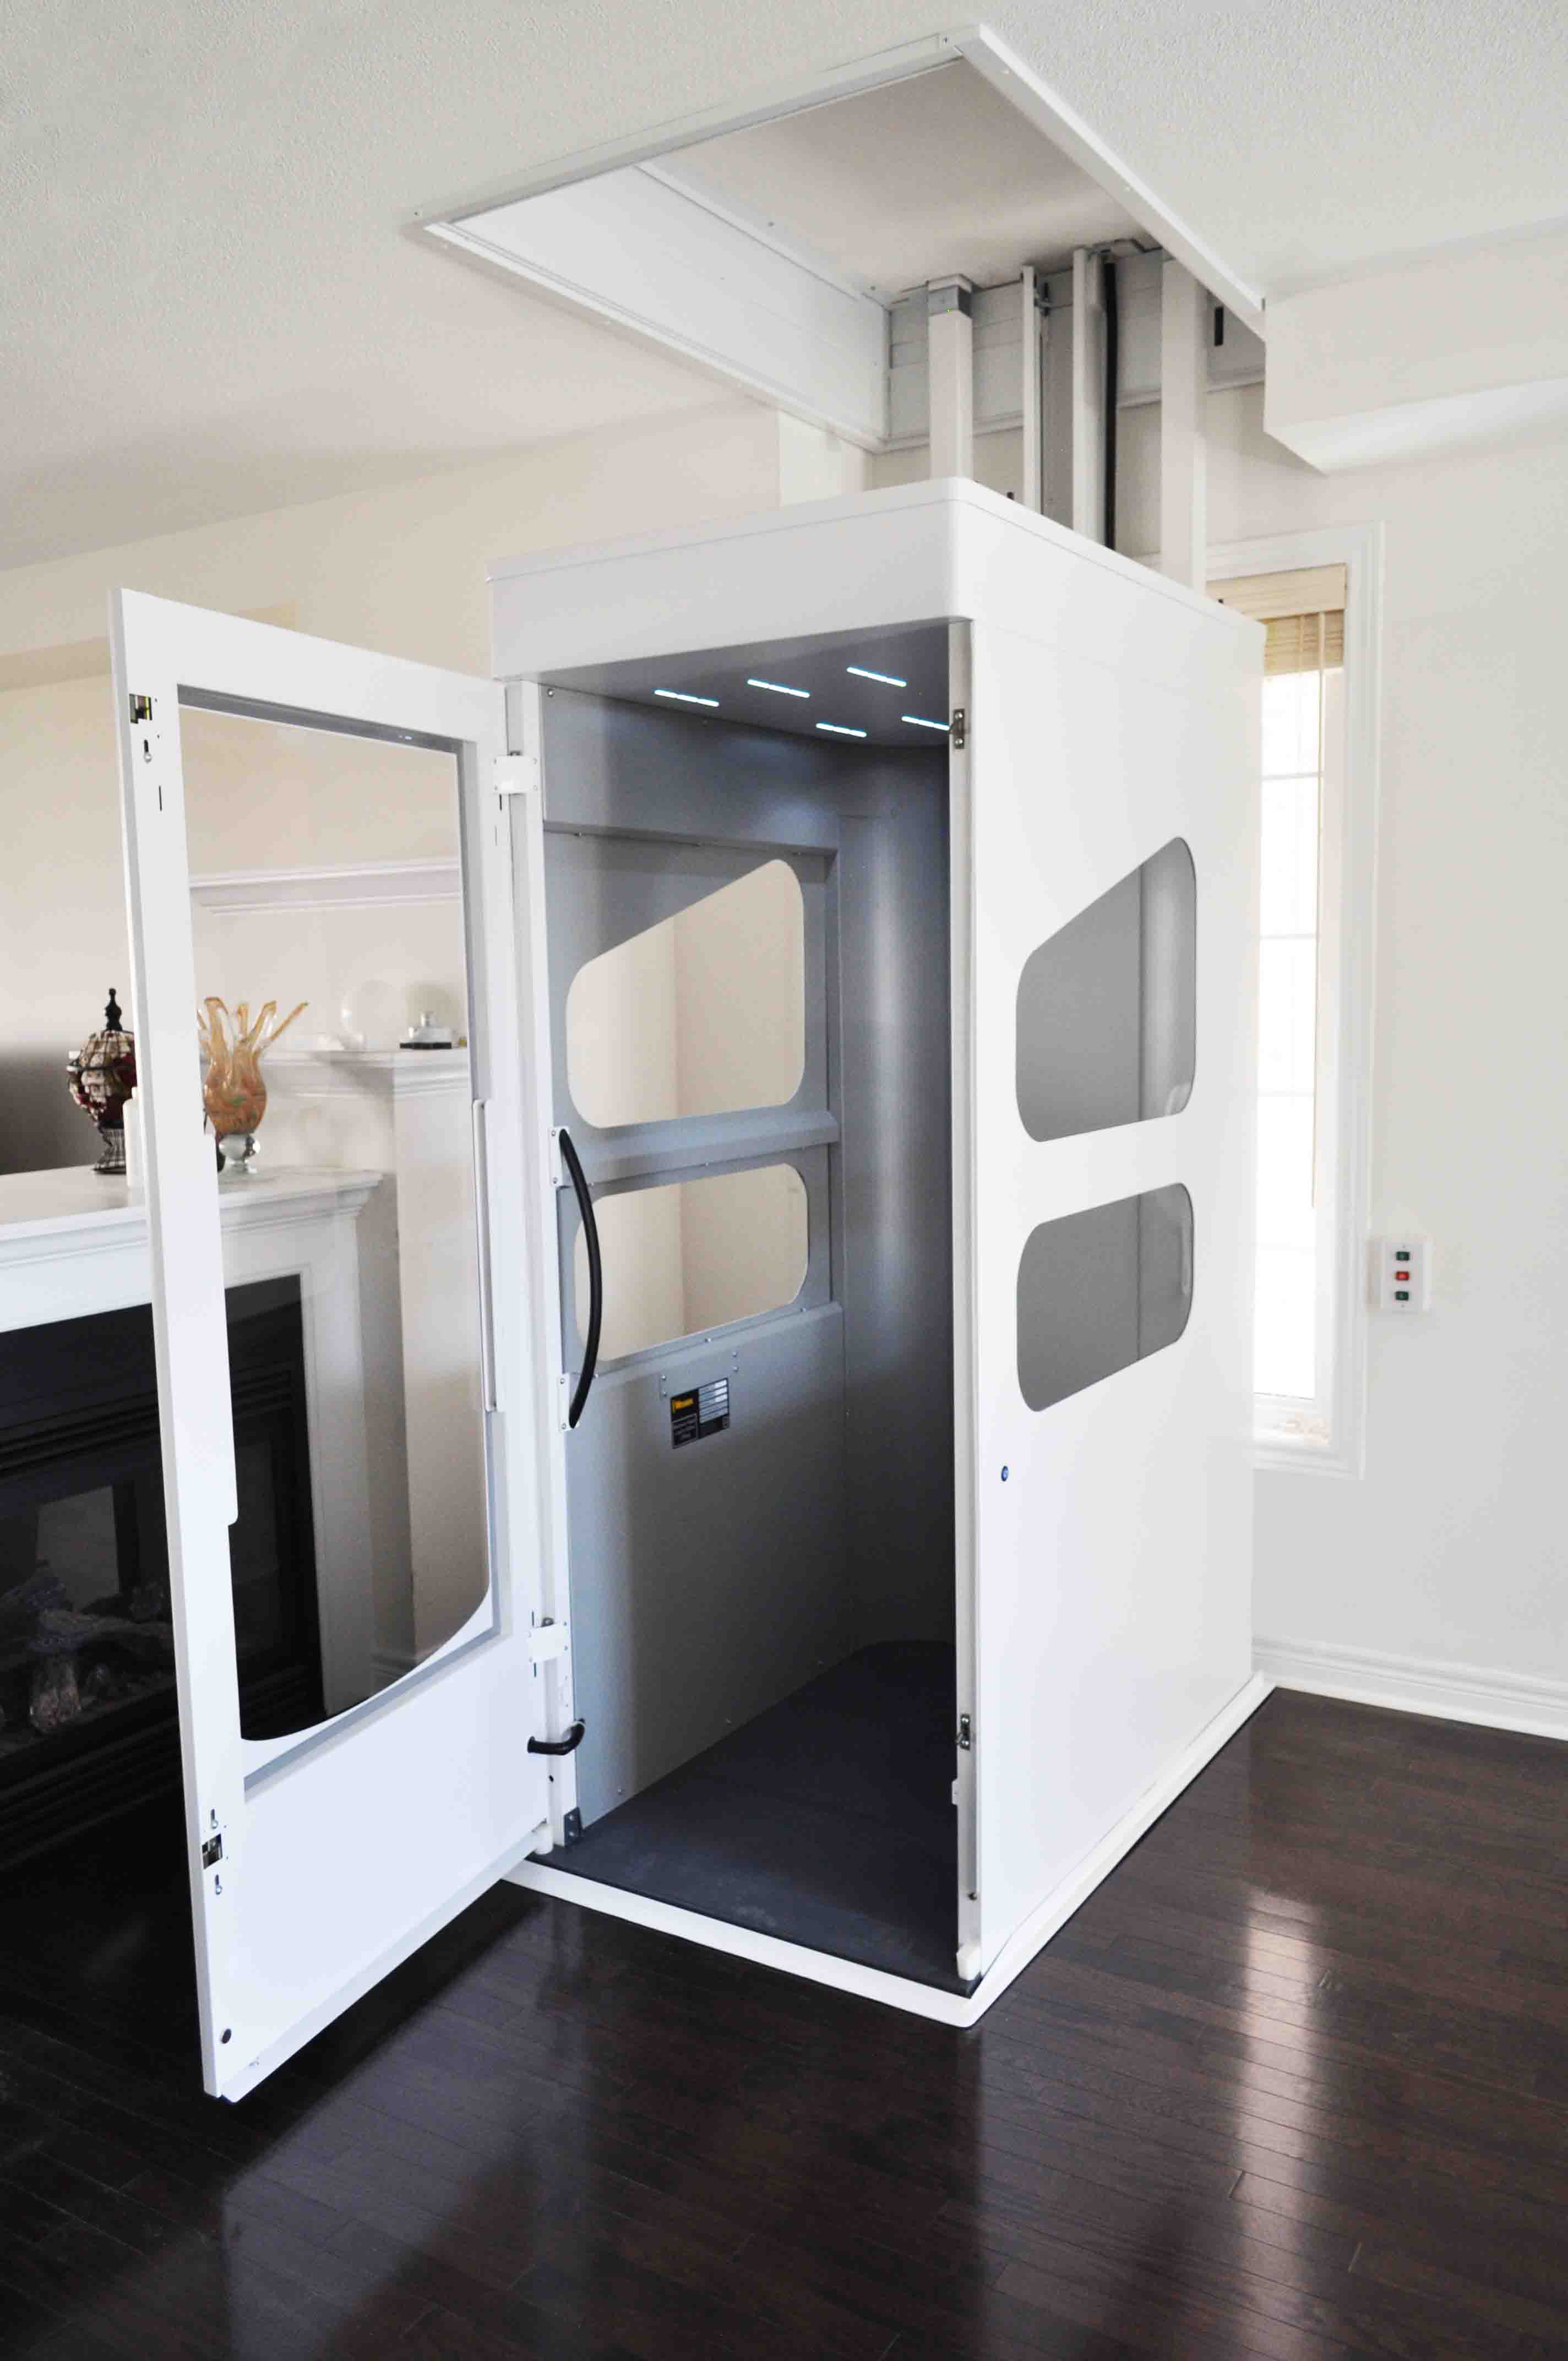 The VE Enclosed Lift expands on the already extensive functionality of the VM.